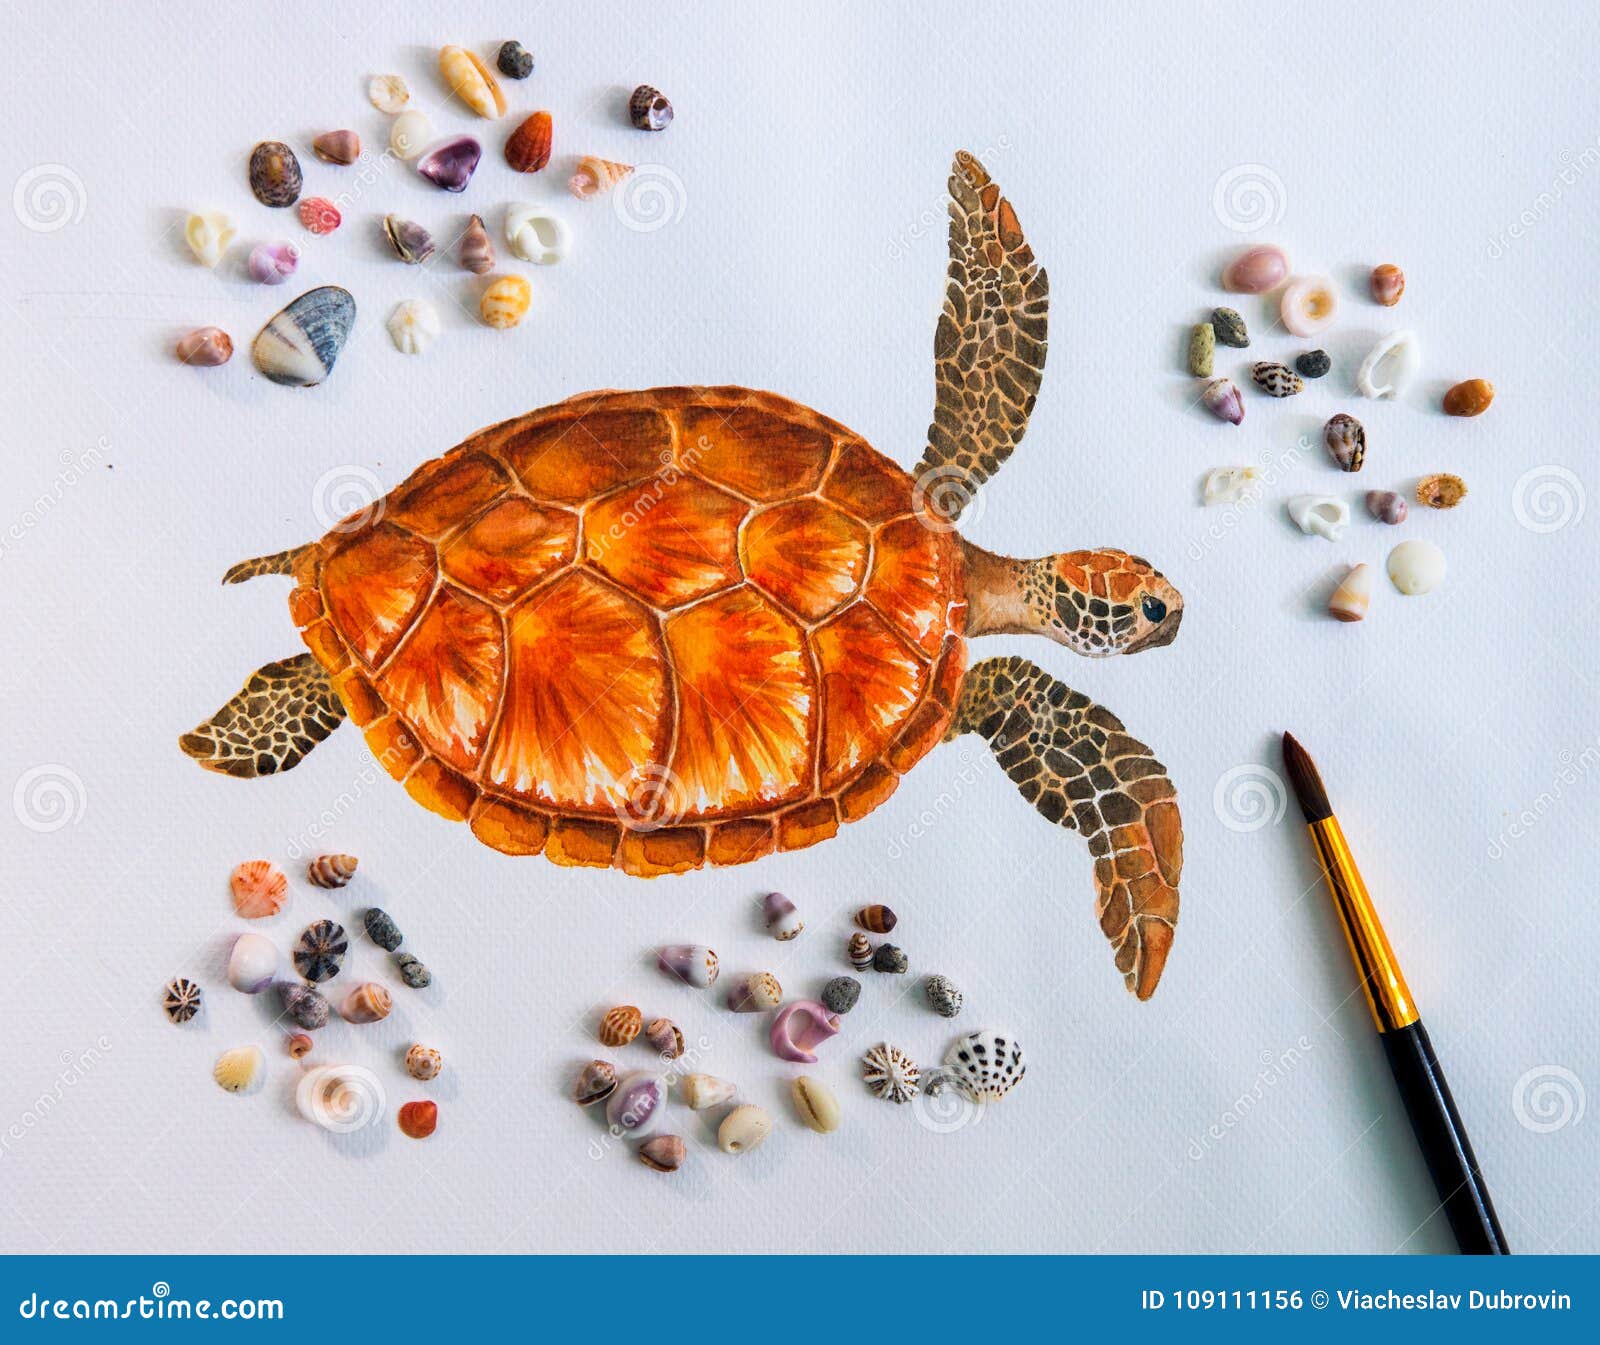 How to Draw a Turtle | Envato Tuts+